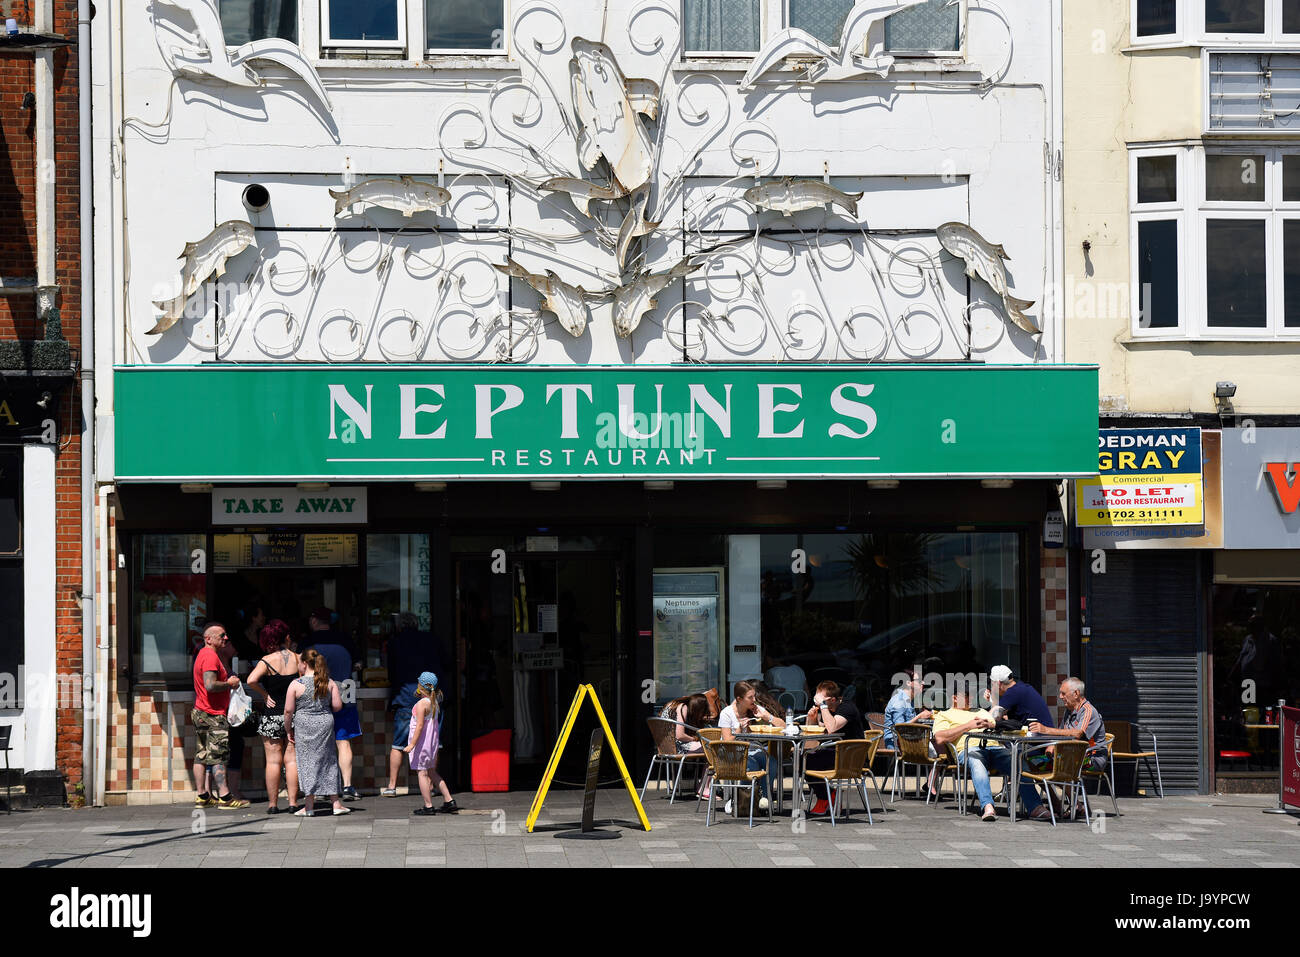 Neptunes Restaurant on Eastern Esplanade Southend on Sea with people dining outside Stock Photo